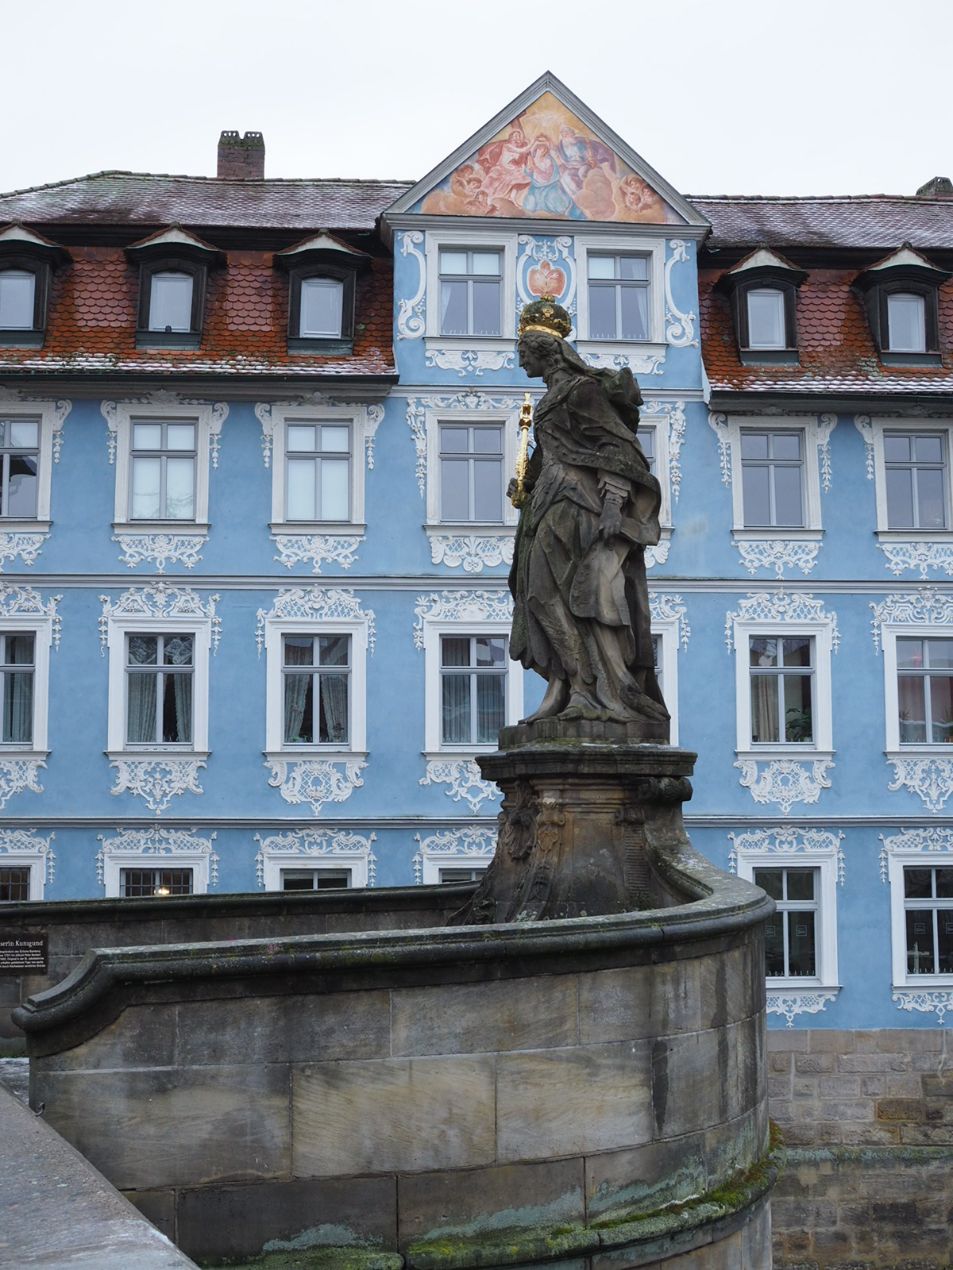 A darkened statue of a woman in flowing robes and a golden crown stands in front of a white and blue filigree decorated town house.